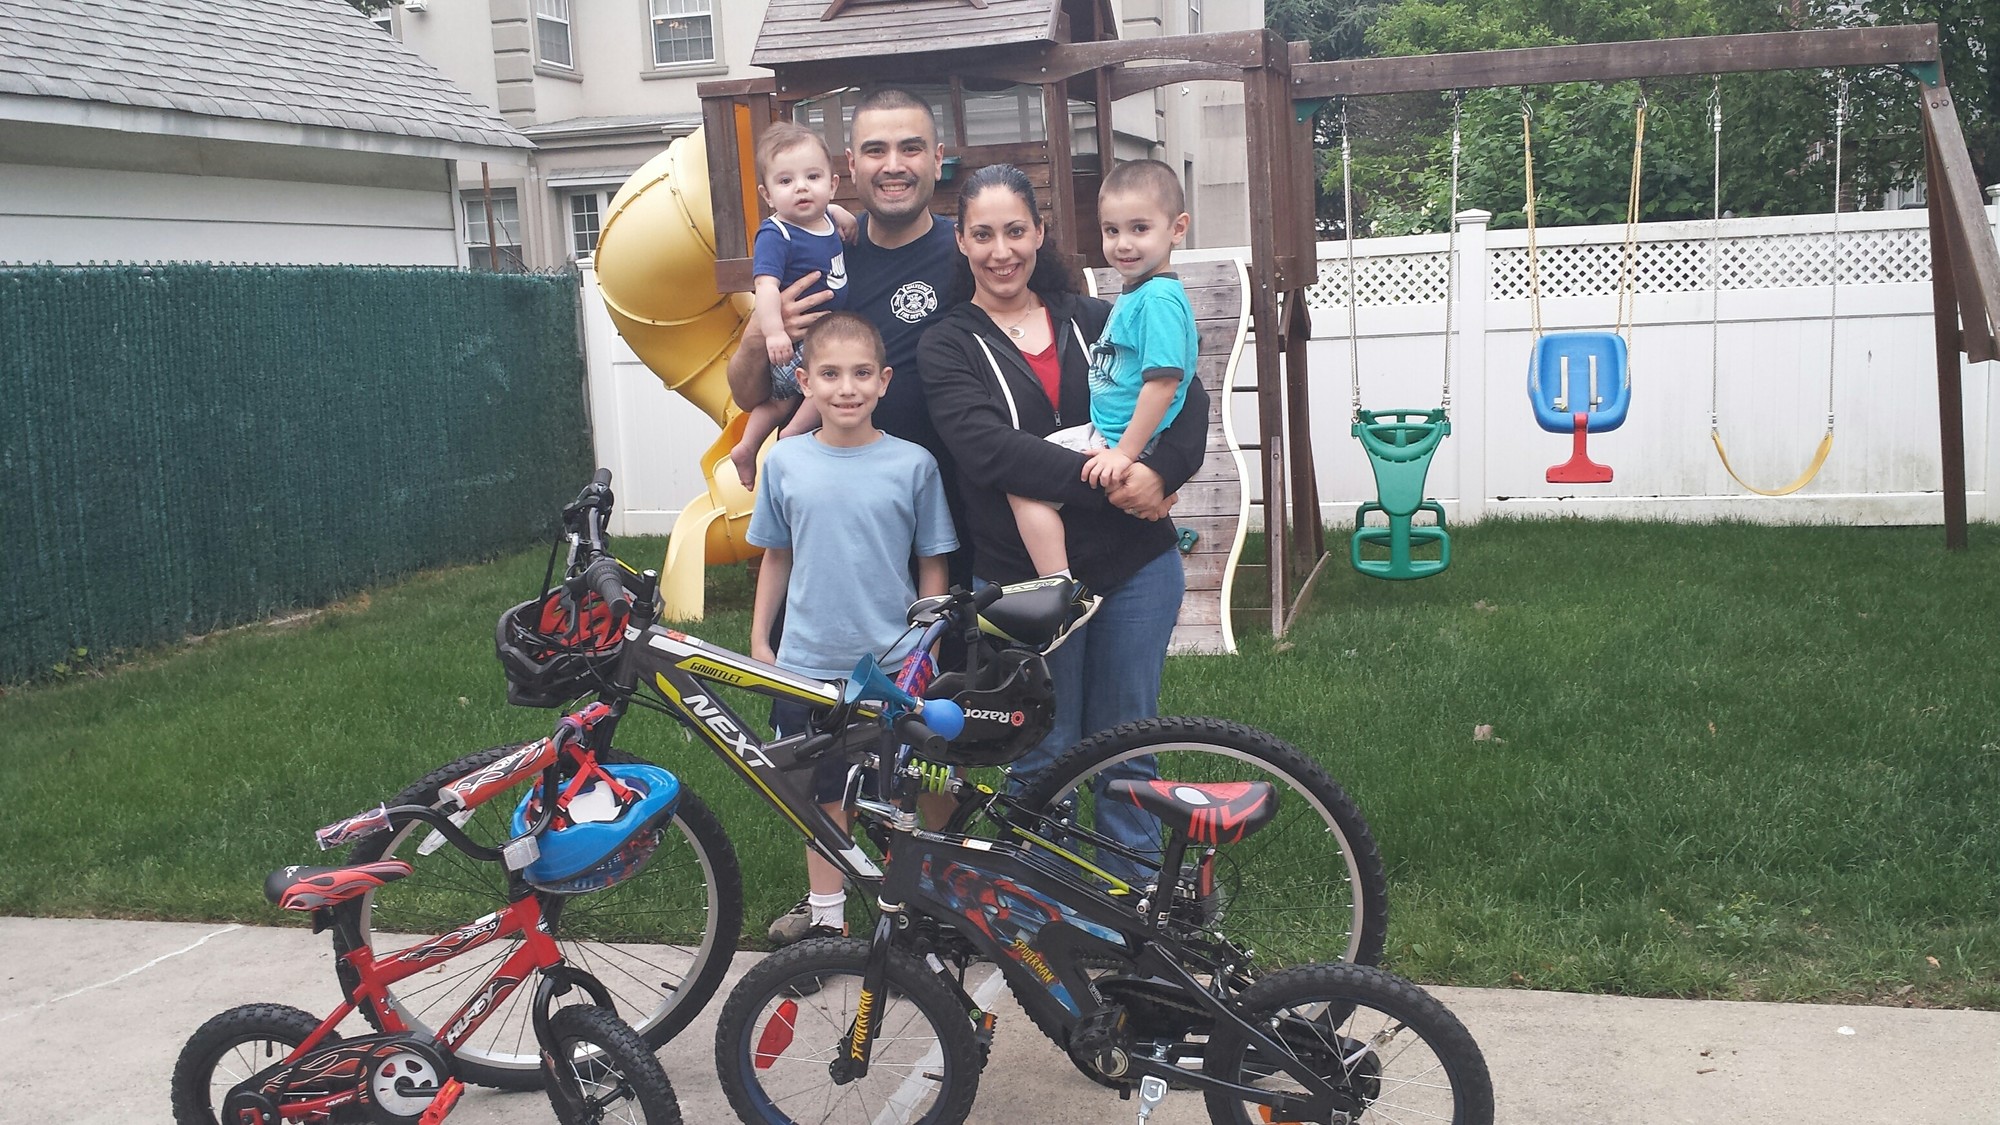 The Huertas family is ready for the Tour de Cure, an American Diabetes Association fundraiser. Malverne Building Department Superintendent Ausberto Huertas with his wife, Dena, and their sons, Gavin, standing, Nathaniel, in Dena’s arms, and Brendan.